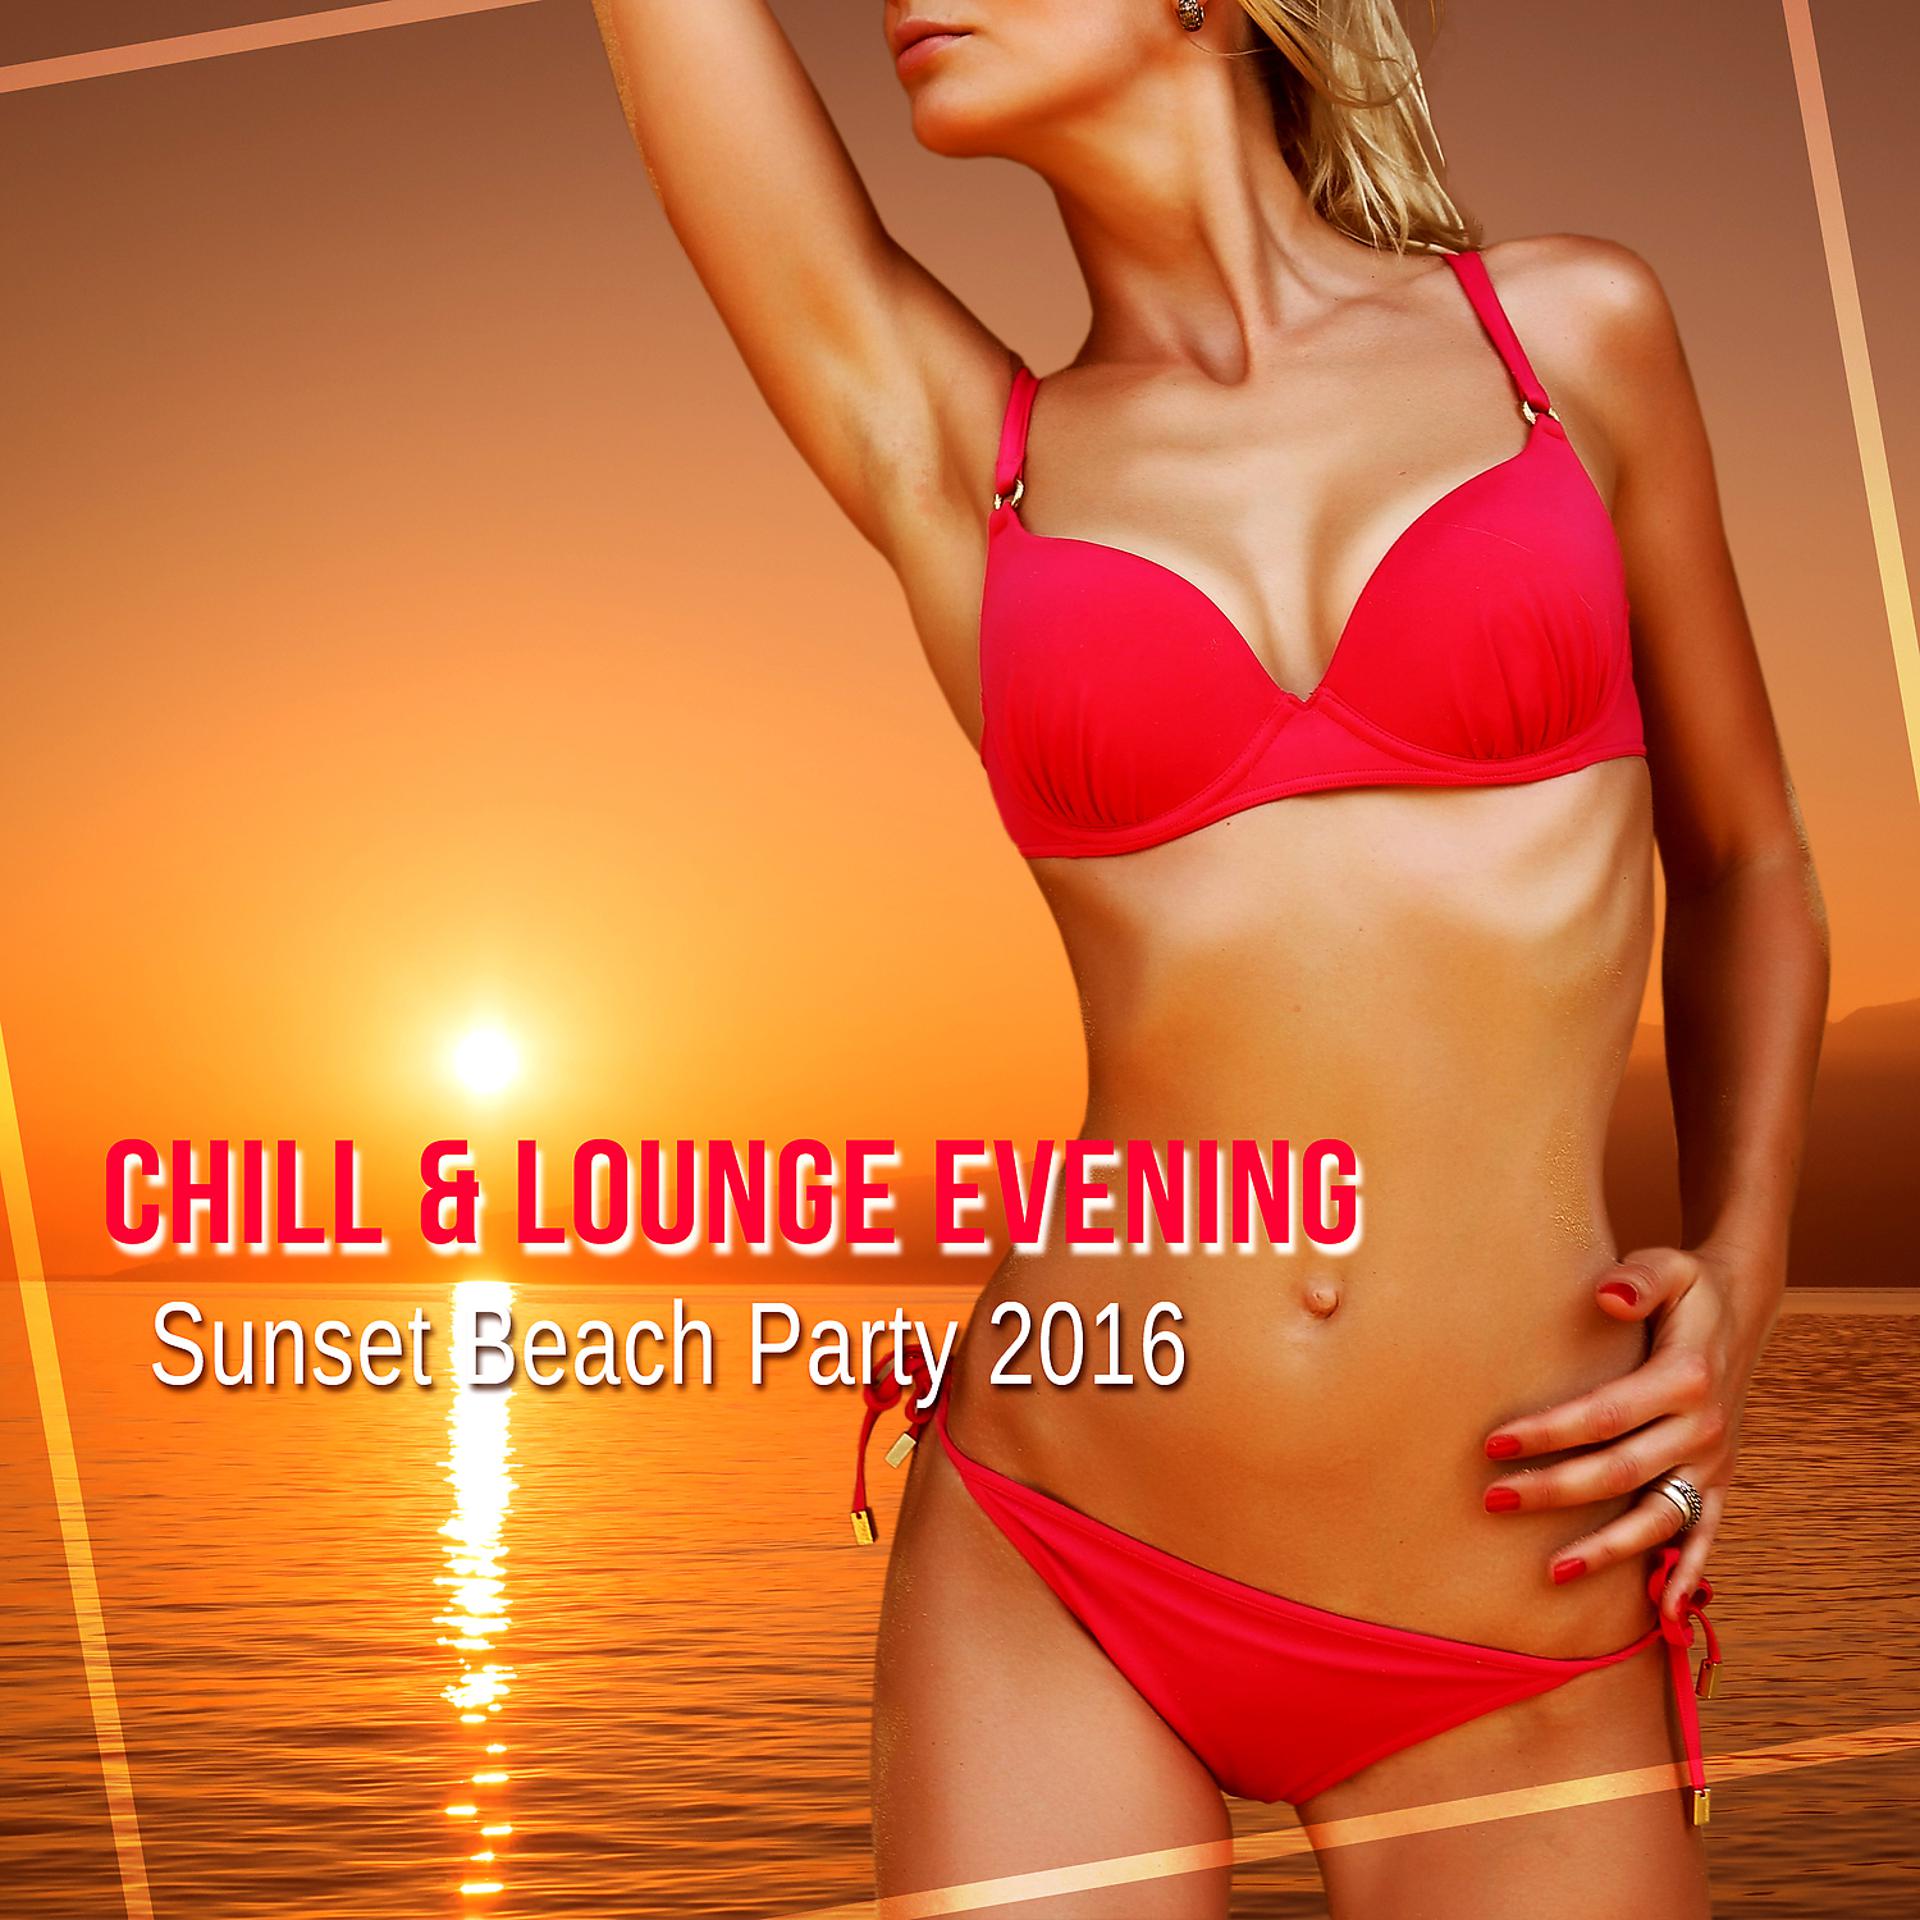 Постер альбома Chill & Lounge Evening - Chillout Music for Cafe & Bar, Relaxation del Mar, Sunset Beach Party 2016